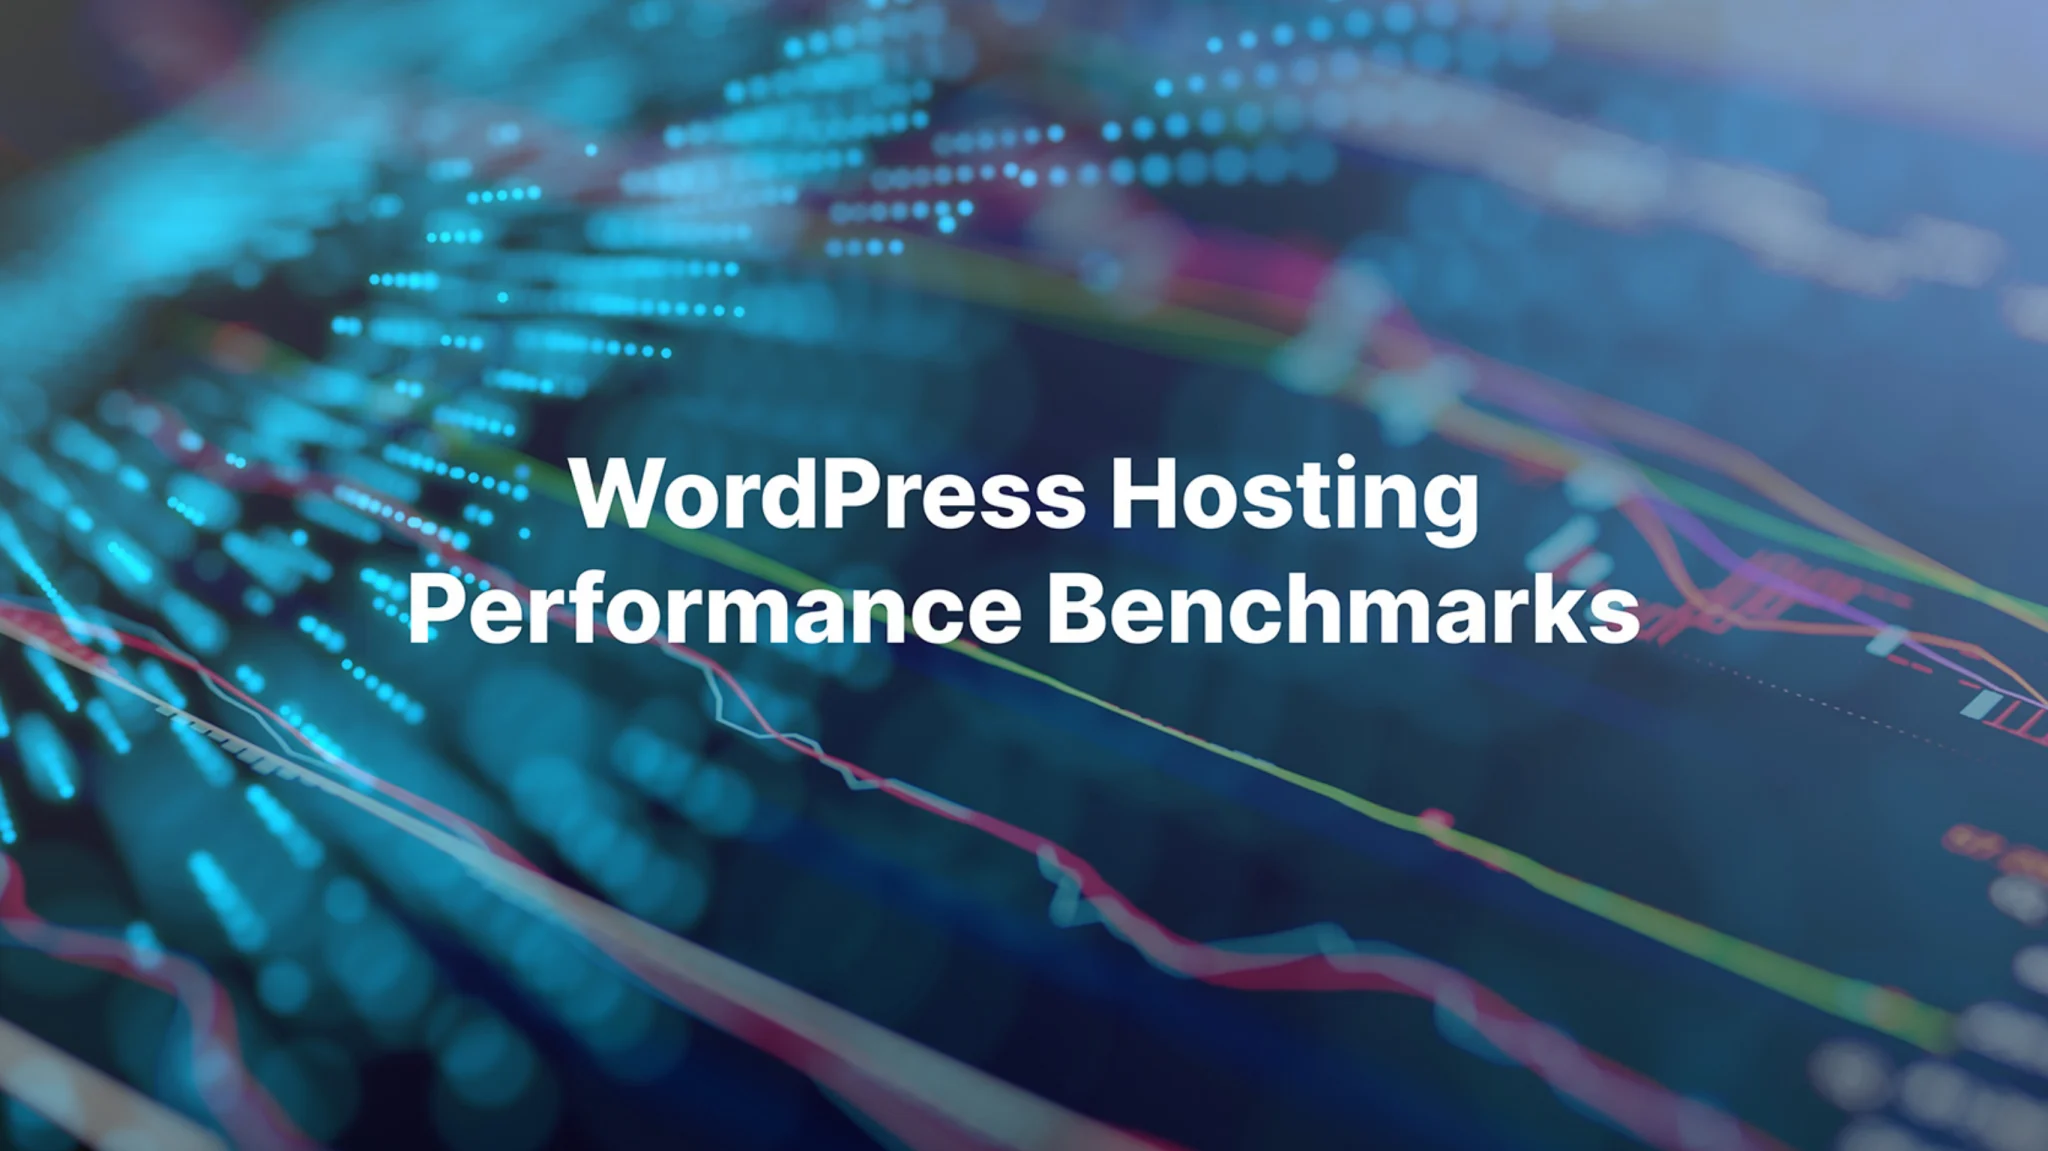 Thumbnail image that says "WordPress Hosting Performance Benchmarks" with abstract graphs in the background